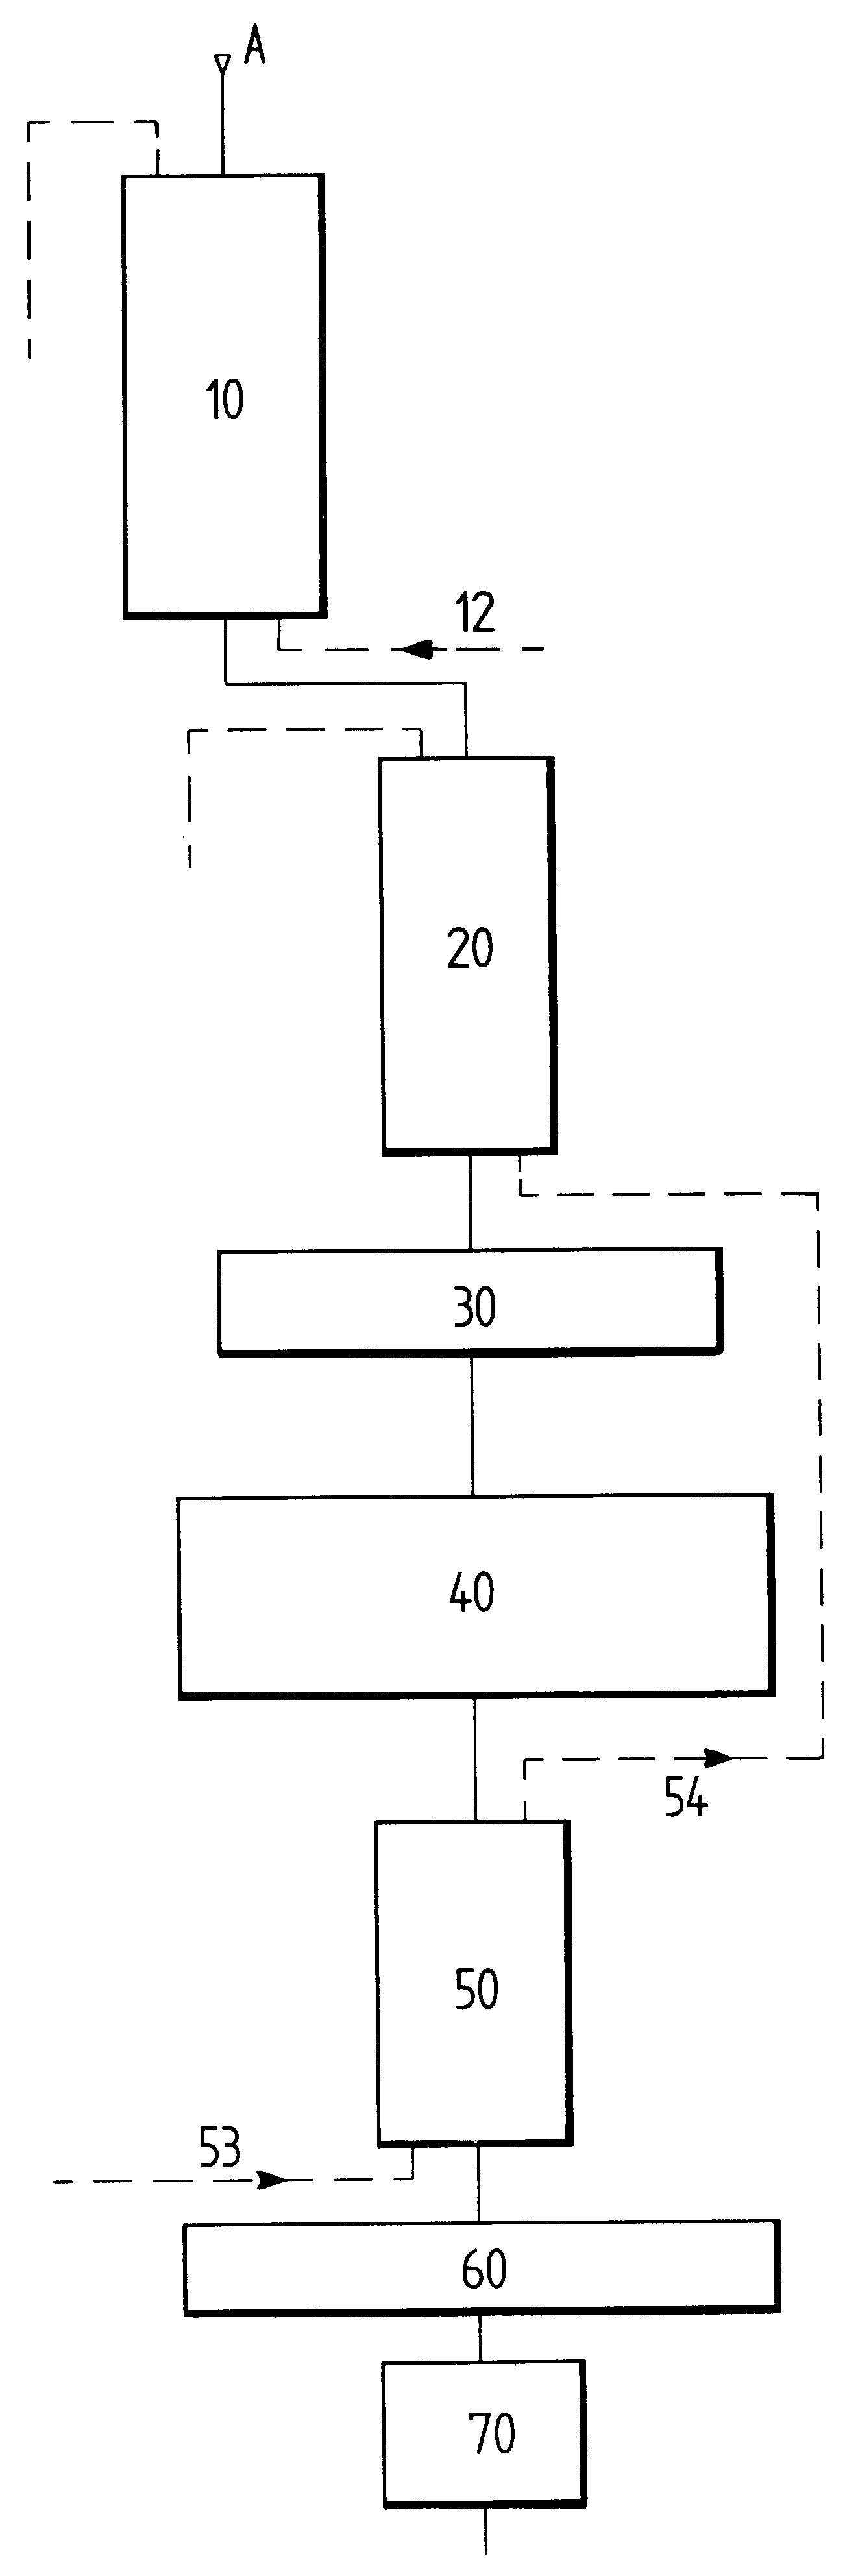 Method of processing whey for demineralization purposes